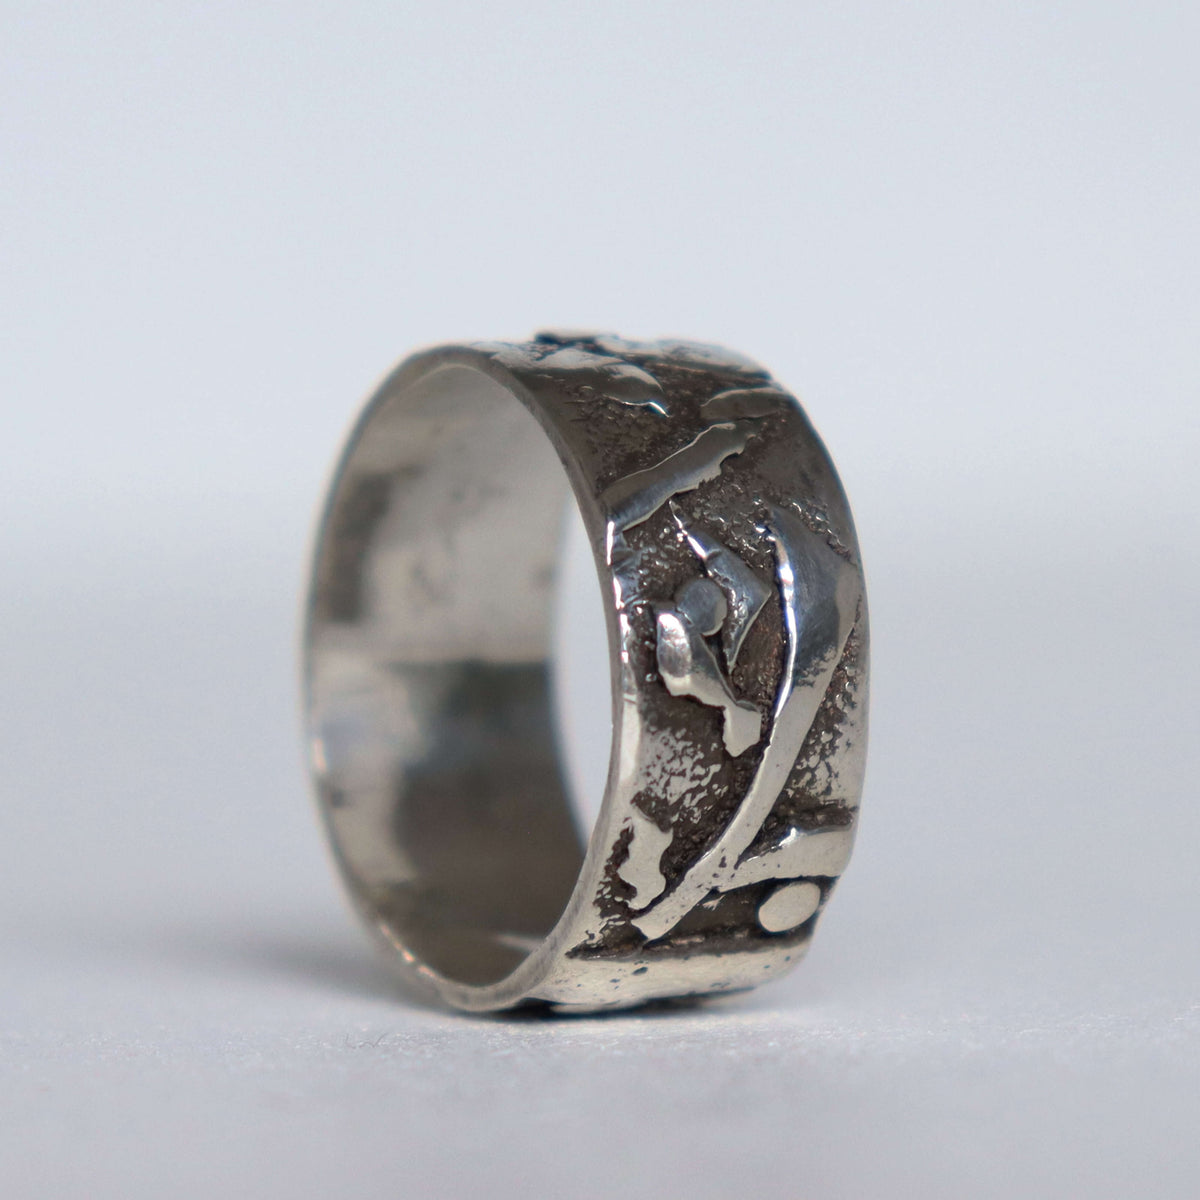 handmade silver ring with pattern & rough texture,Thumb ring, unisex, wide band, by roff jewellery